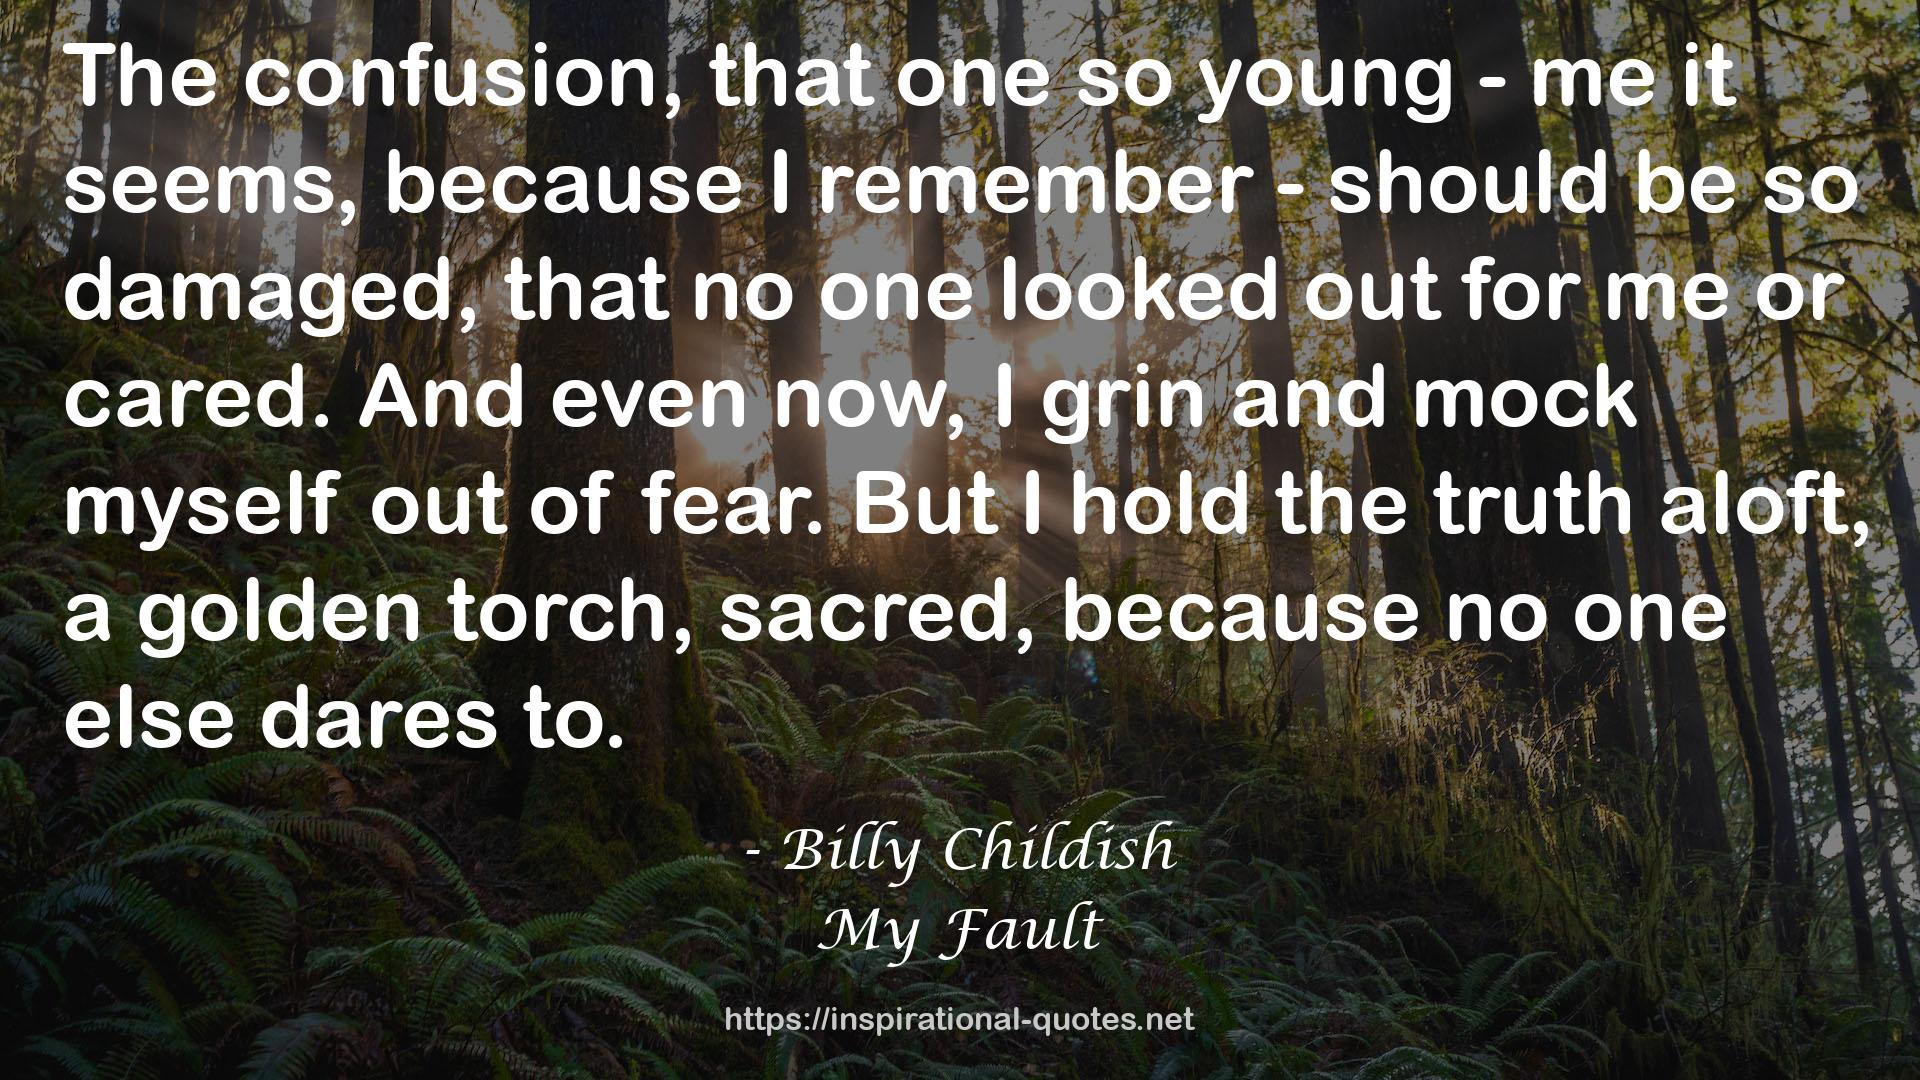 Billy Childish QUOTES